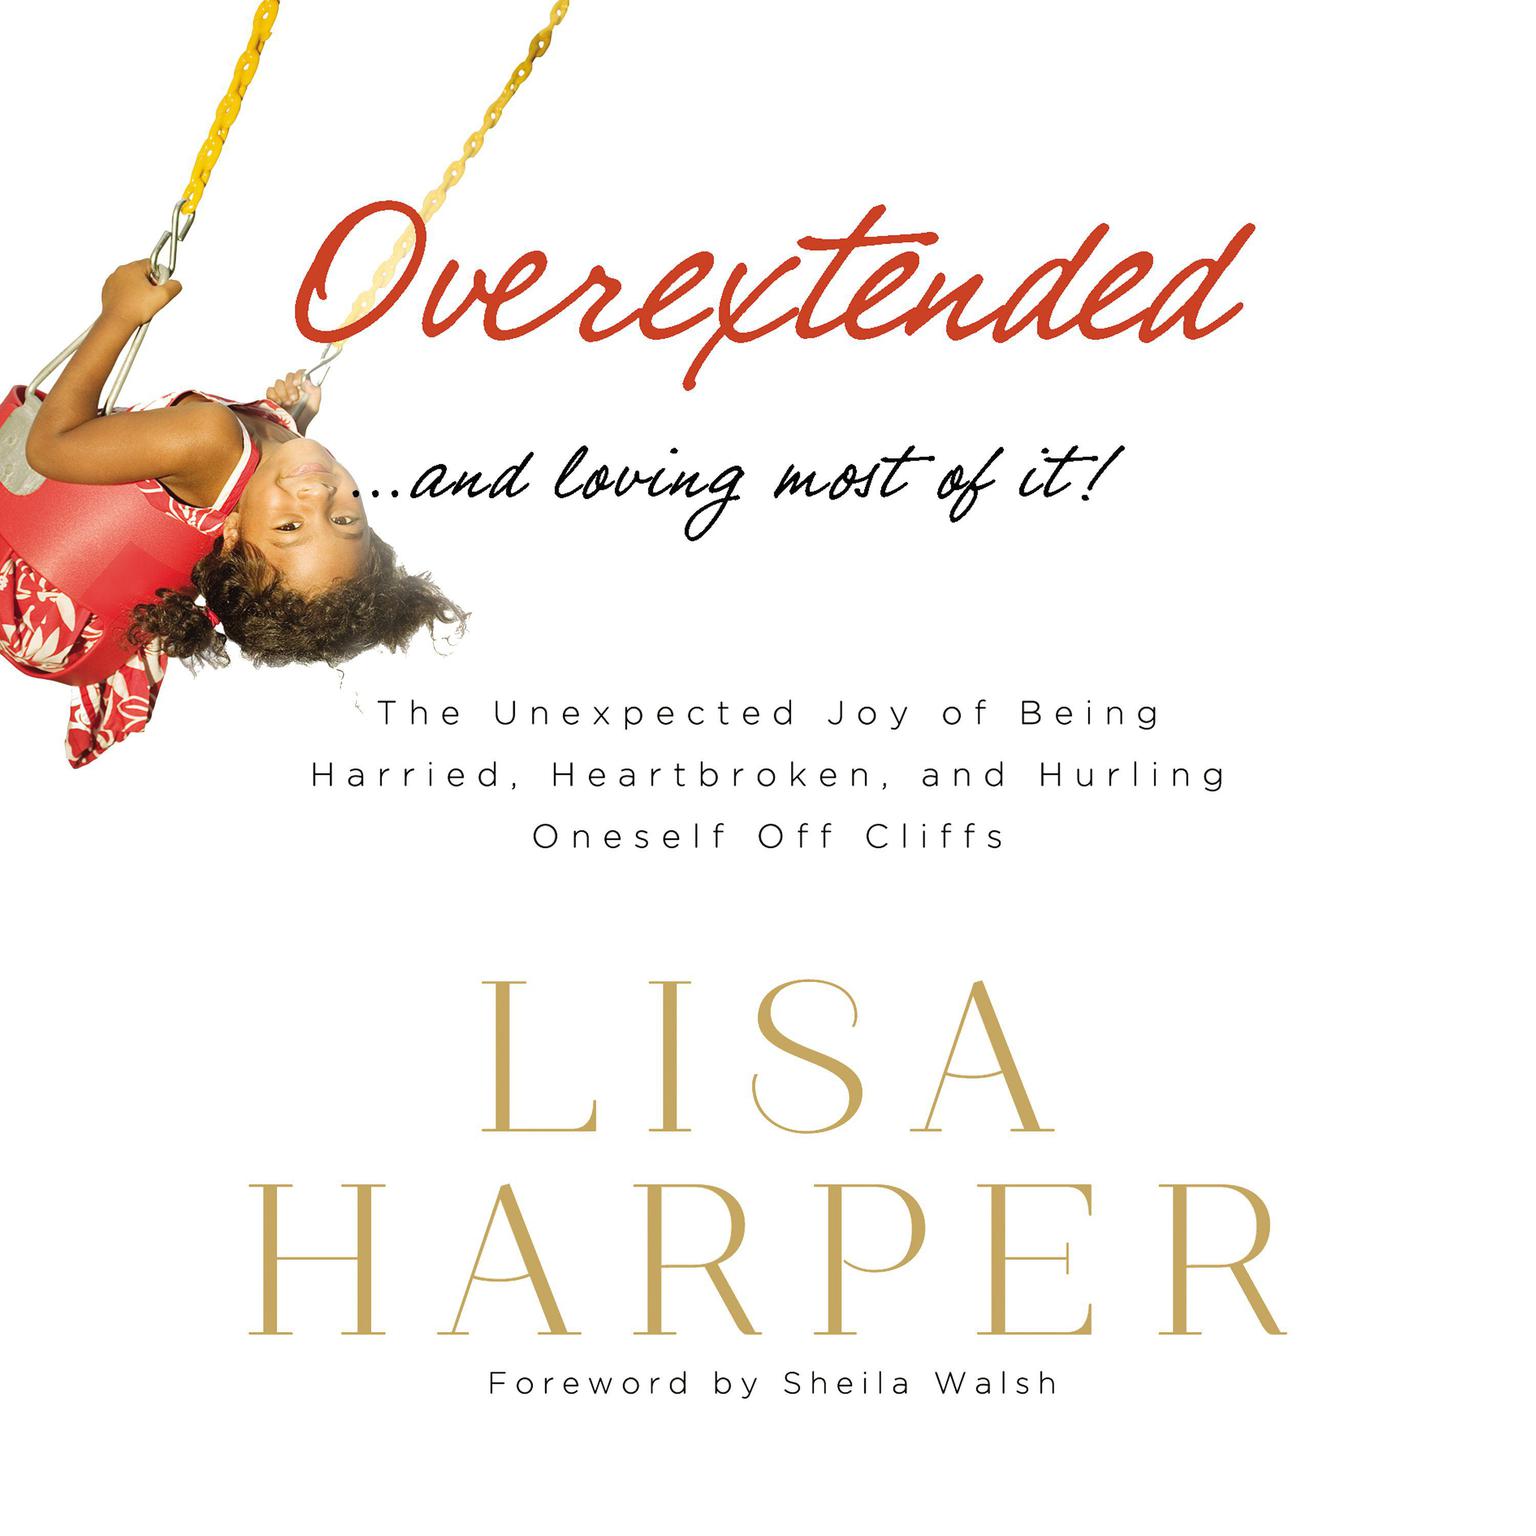 Overextended and Loving Most of It: The Unexpected Joy of Being Harried, Heartbroken, and Hurling Oneself Off Cliffs Audiobook, by Lisa Harper